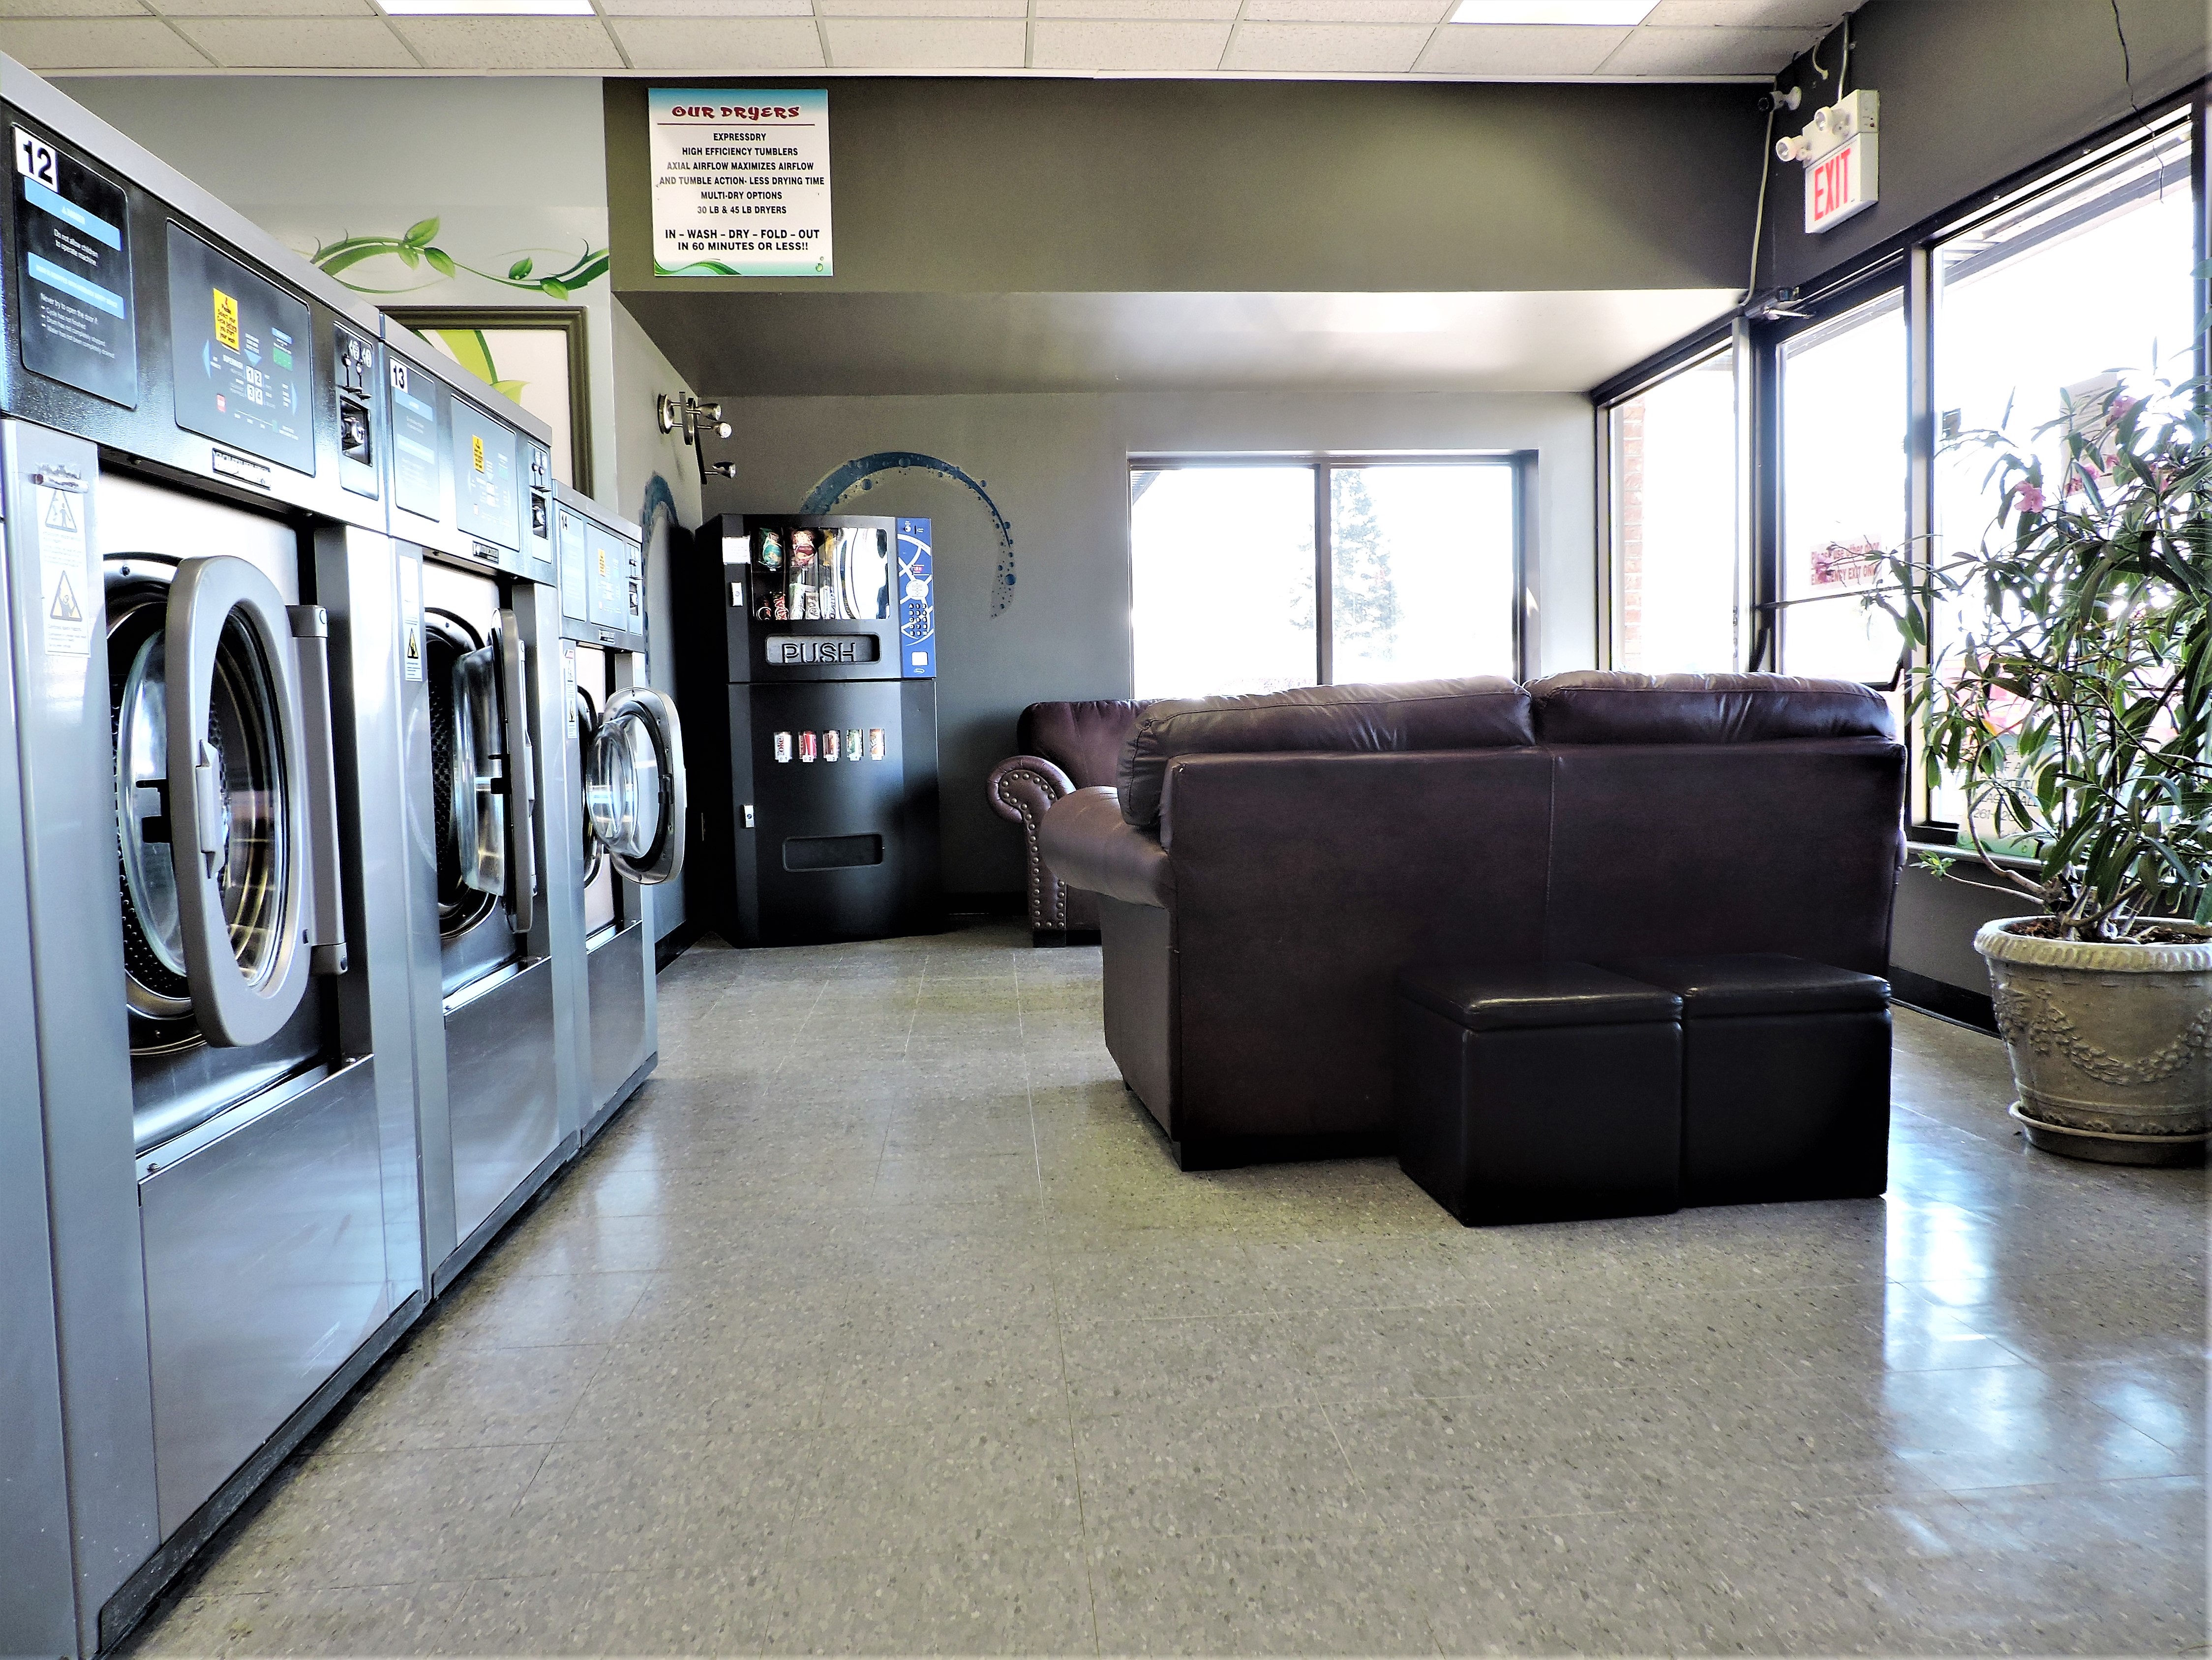 Relax while you wait: stocked vending machine, comfy couches, & TV